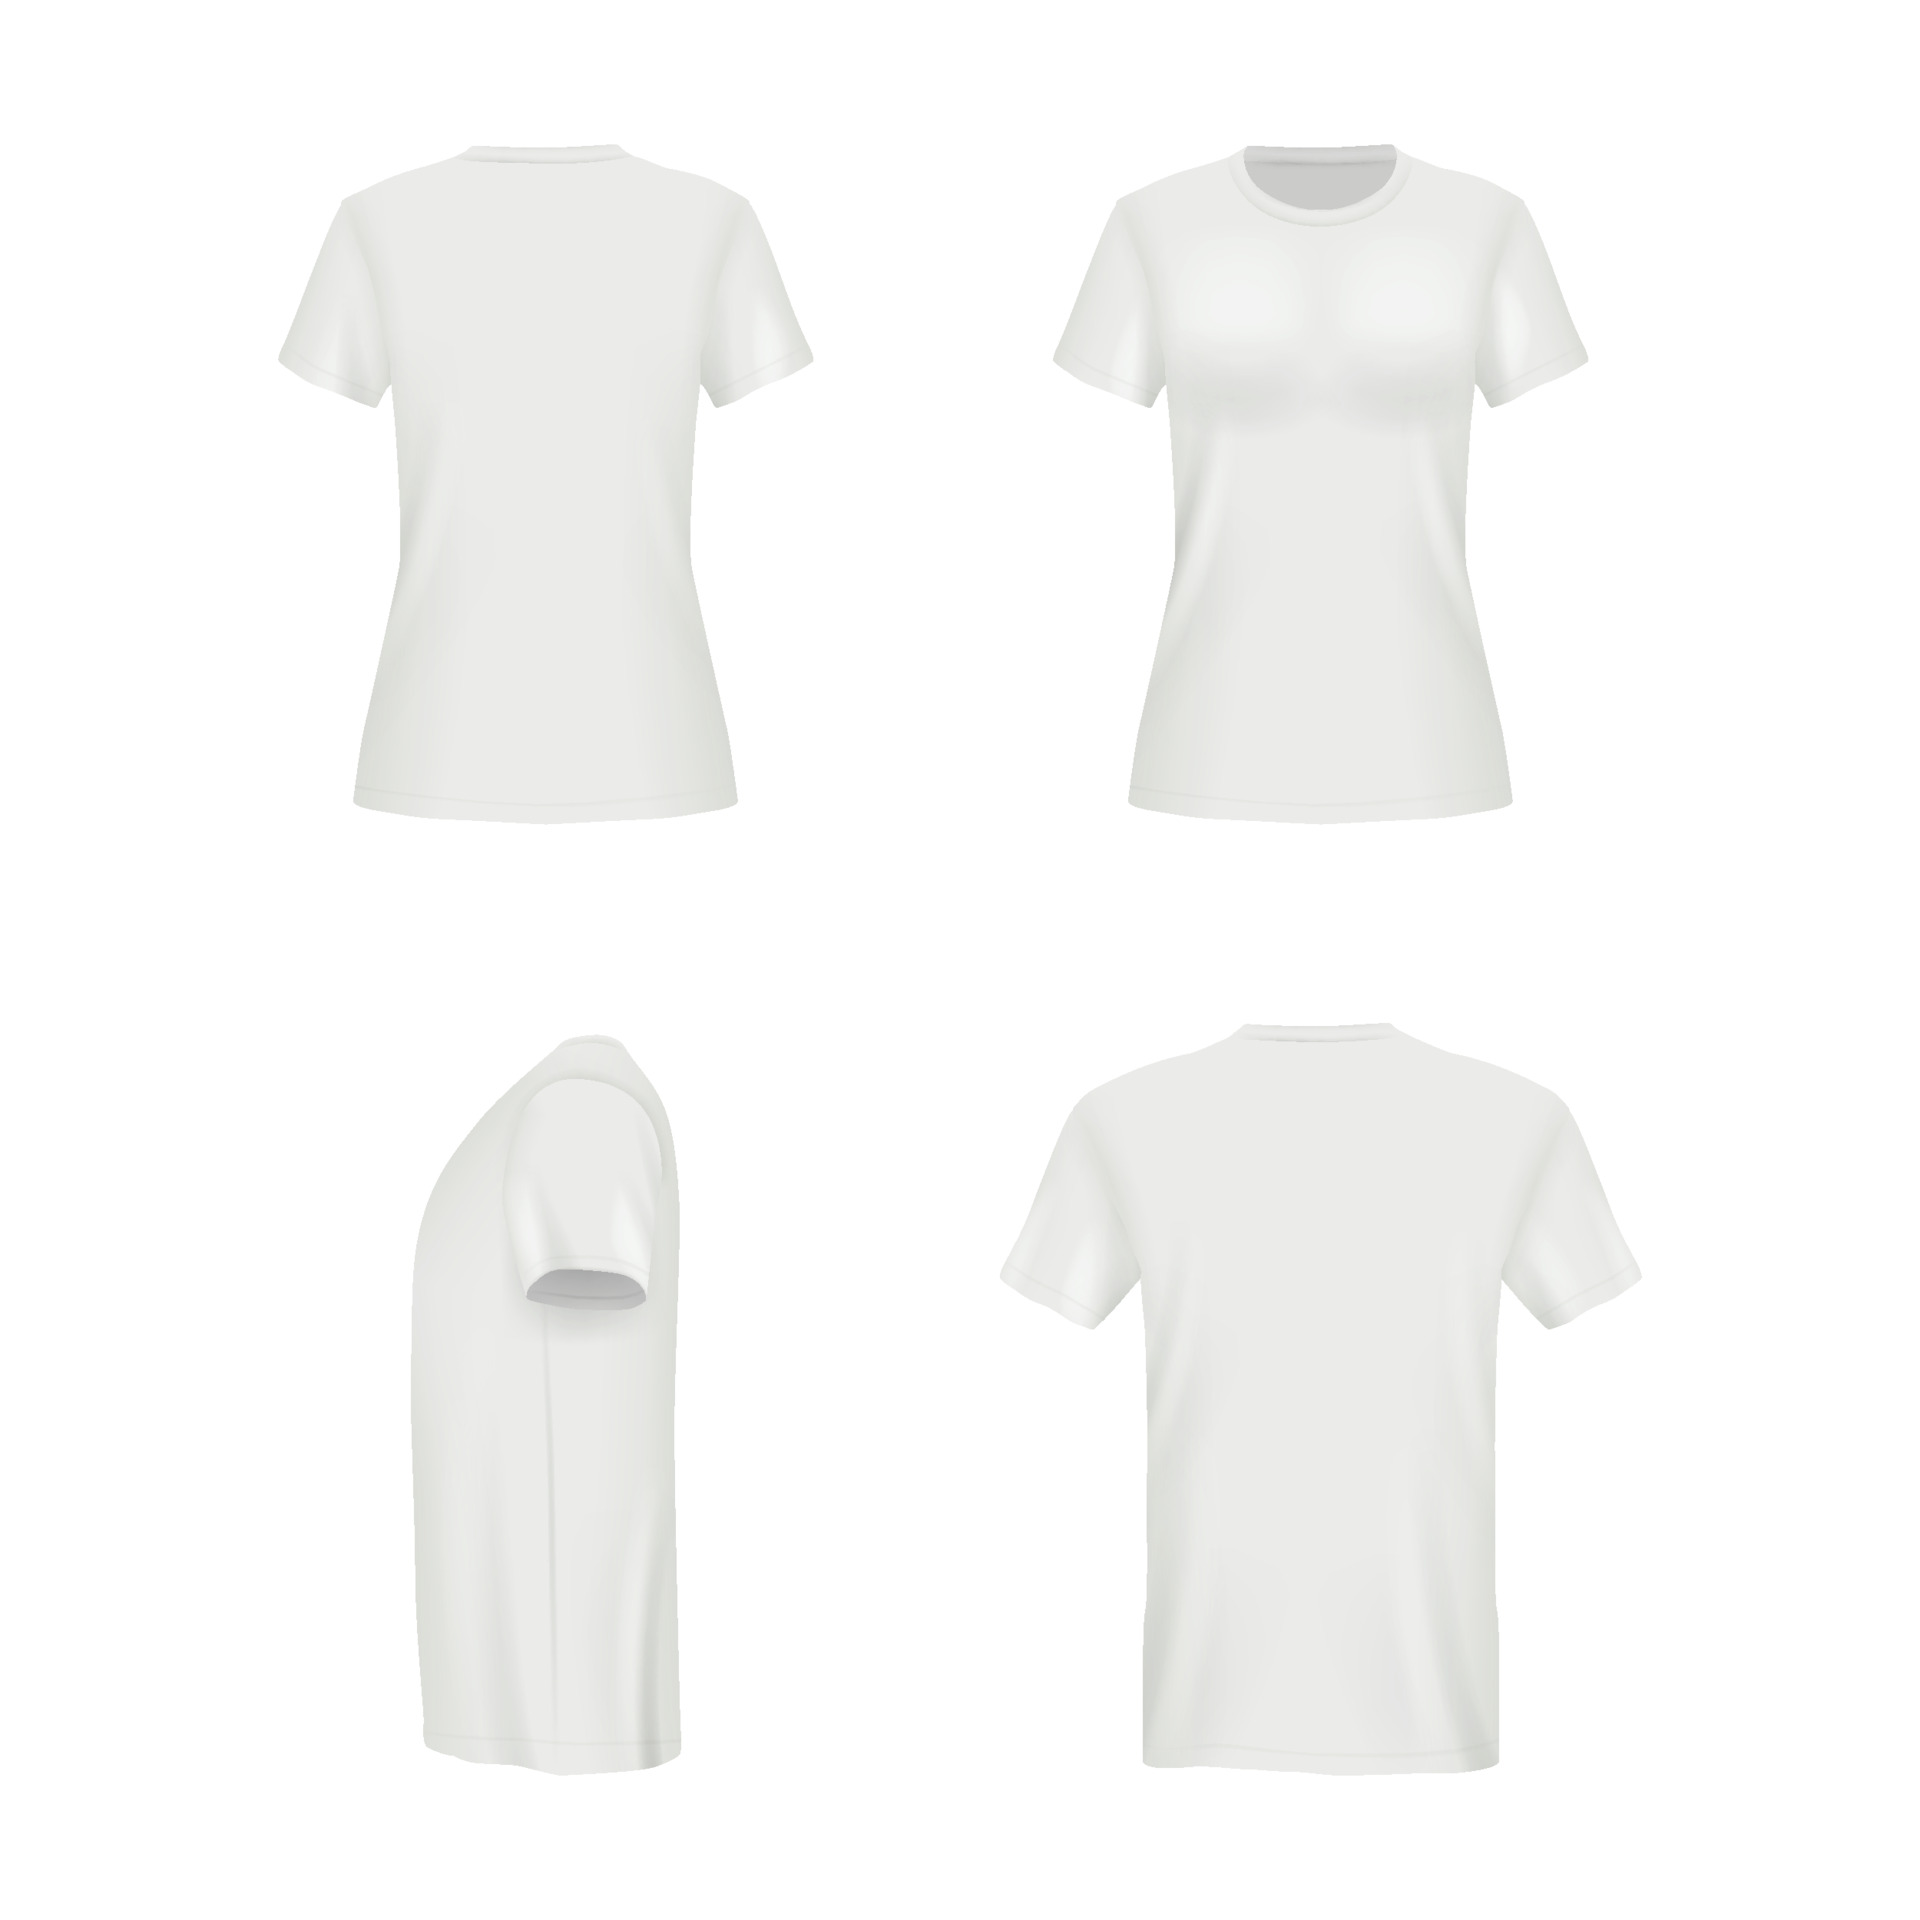 Realistic white t-shirts design 3605356 Vector Art at Vecteezy